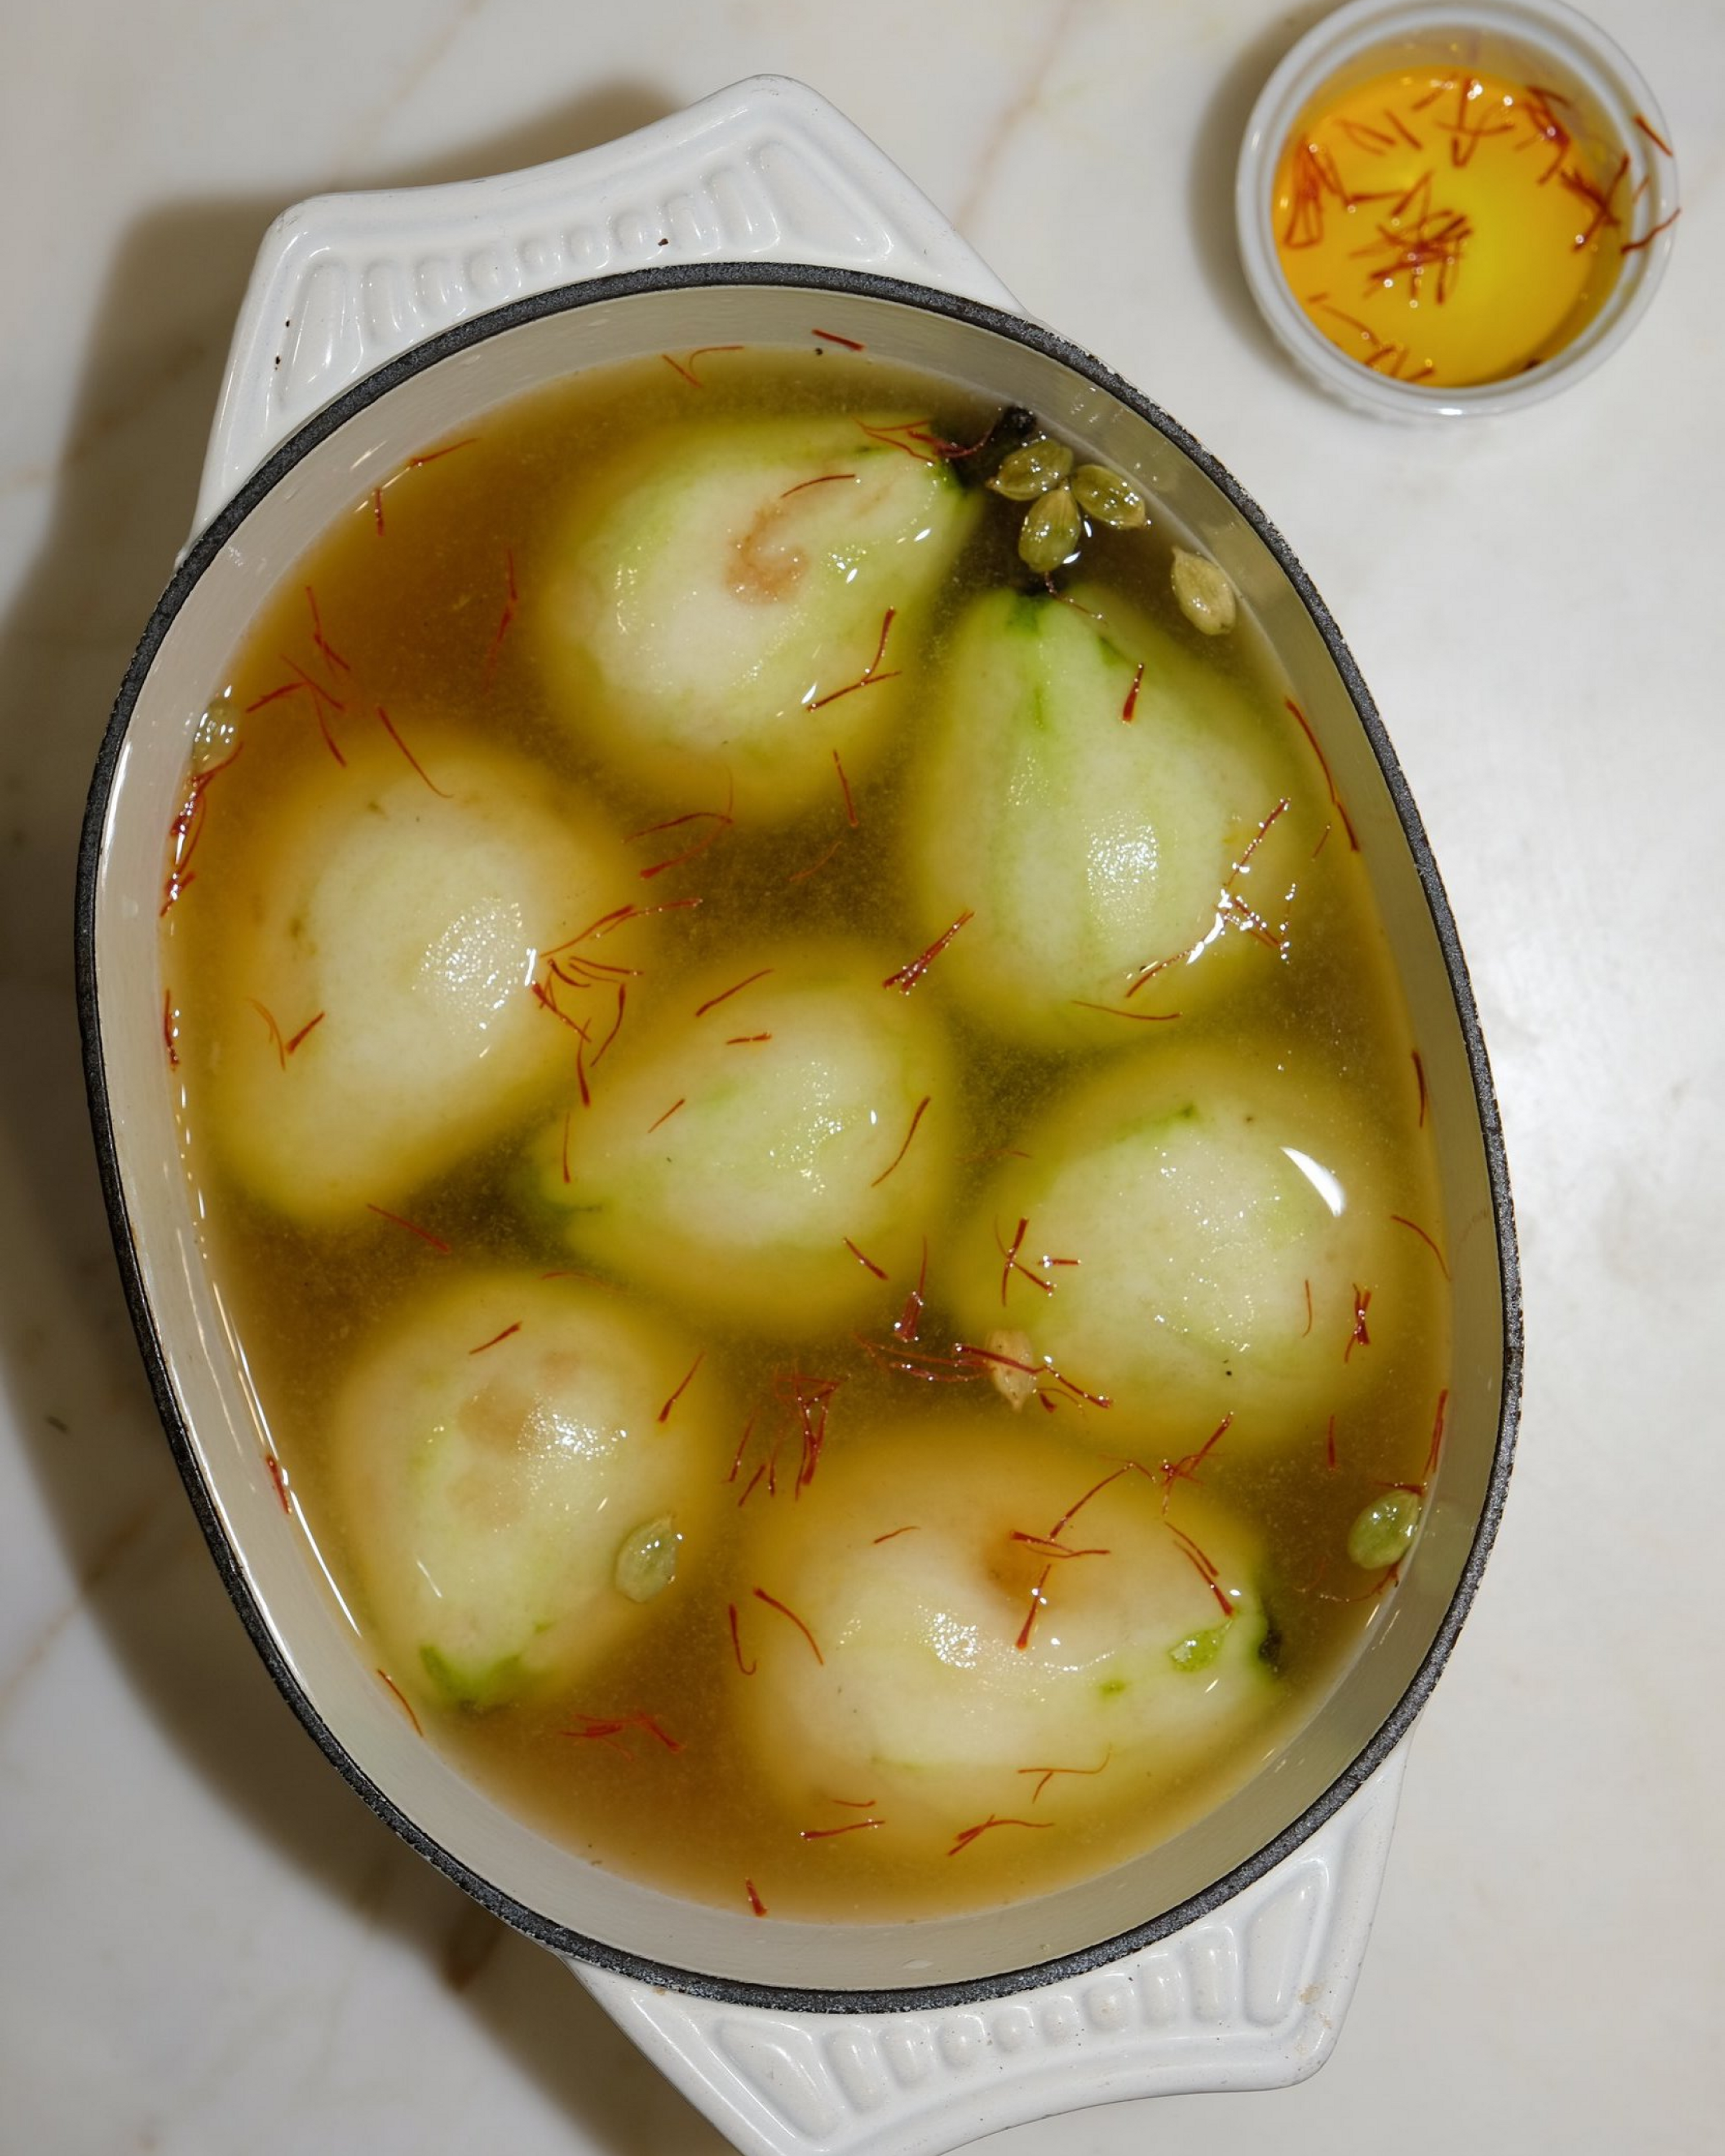 pears poaching in the liquid